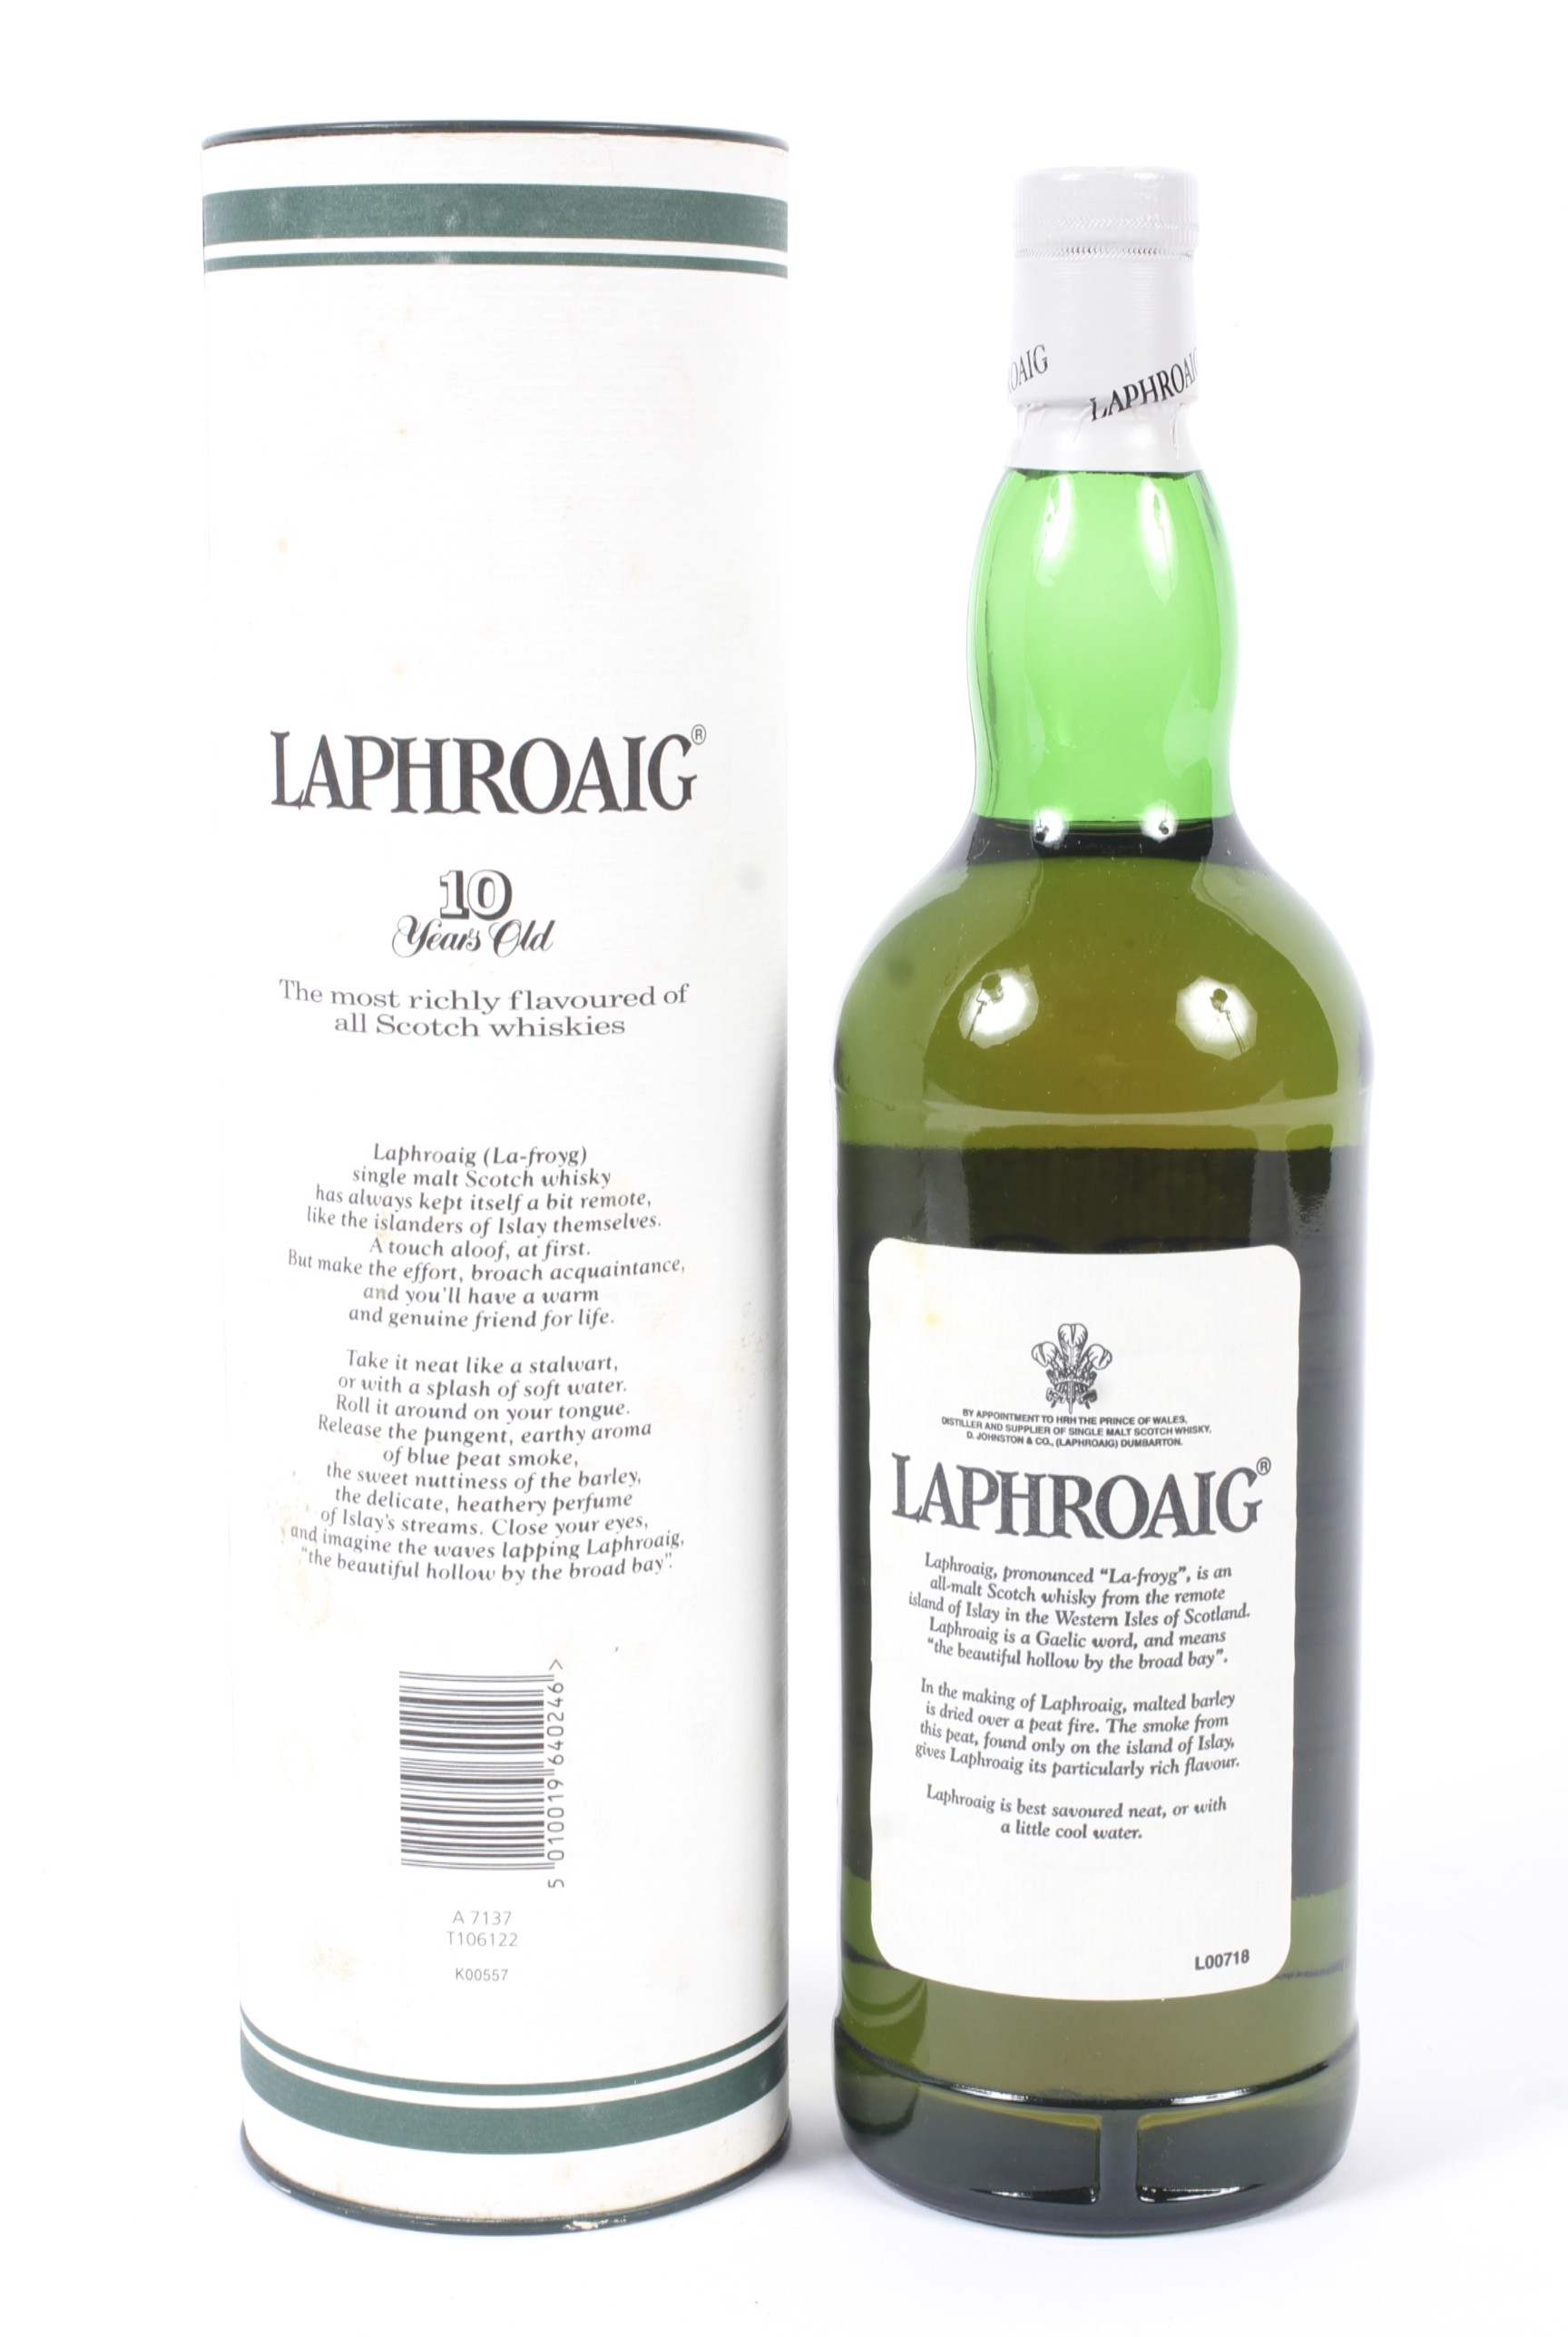 A bottle of Laphroaig 10 years old single malt Scotch whisky. Boxed, 1 litre, 43% vol. - Image 2 of 2